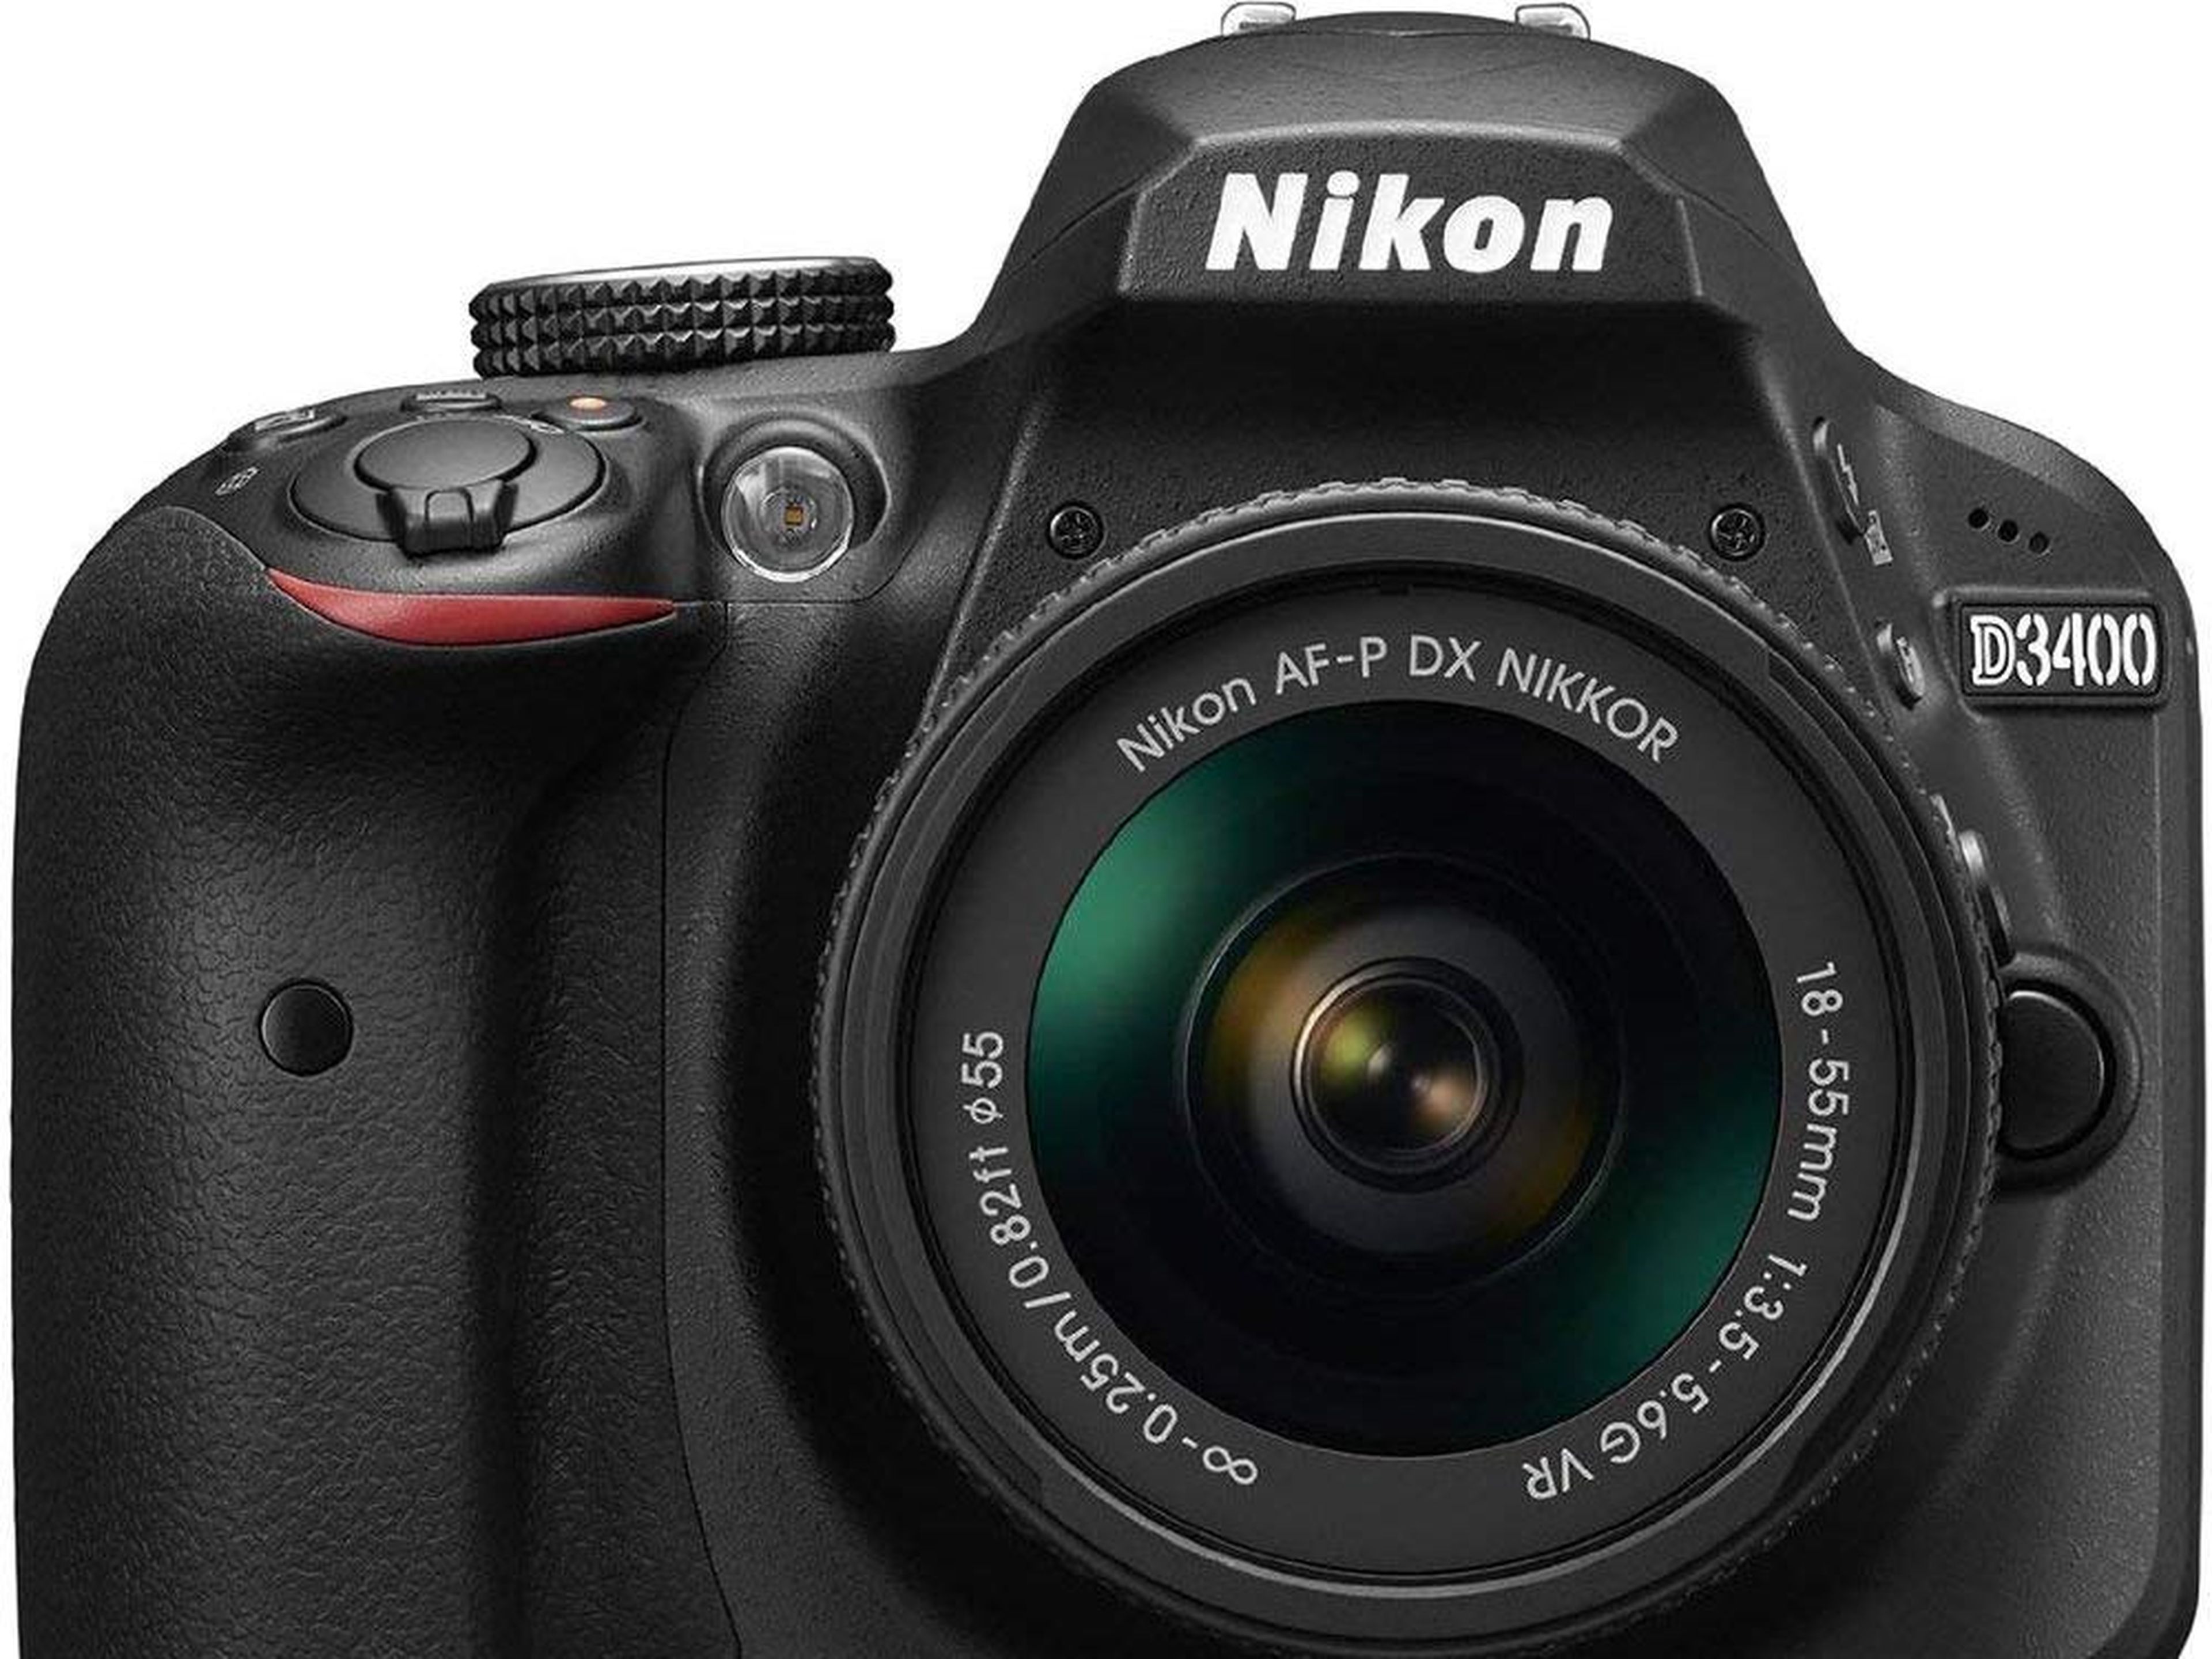 Now, let's take a look at the different crop-sensor and full-frame options from each company. Nikon currently offers eight crop-sensor cameras on its website, but there are older models available from resellers and third parties.